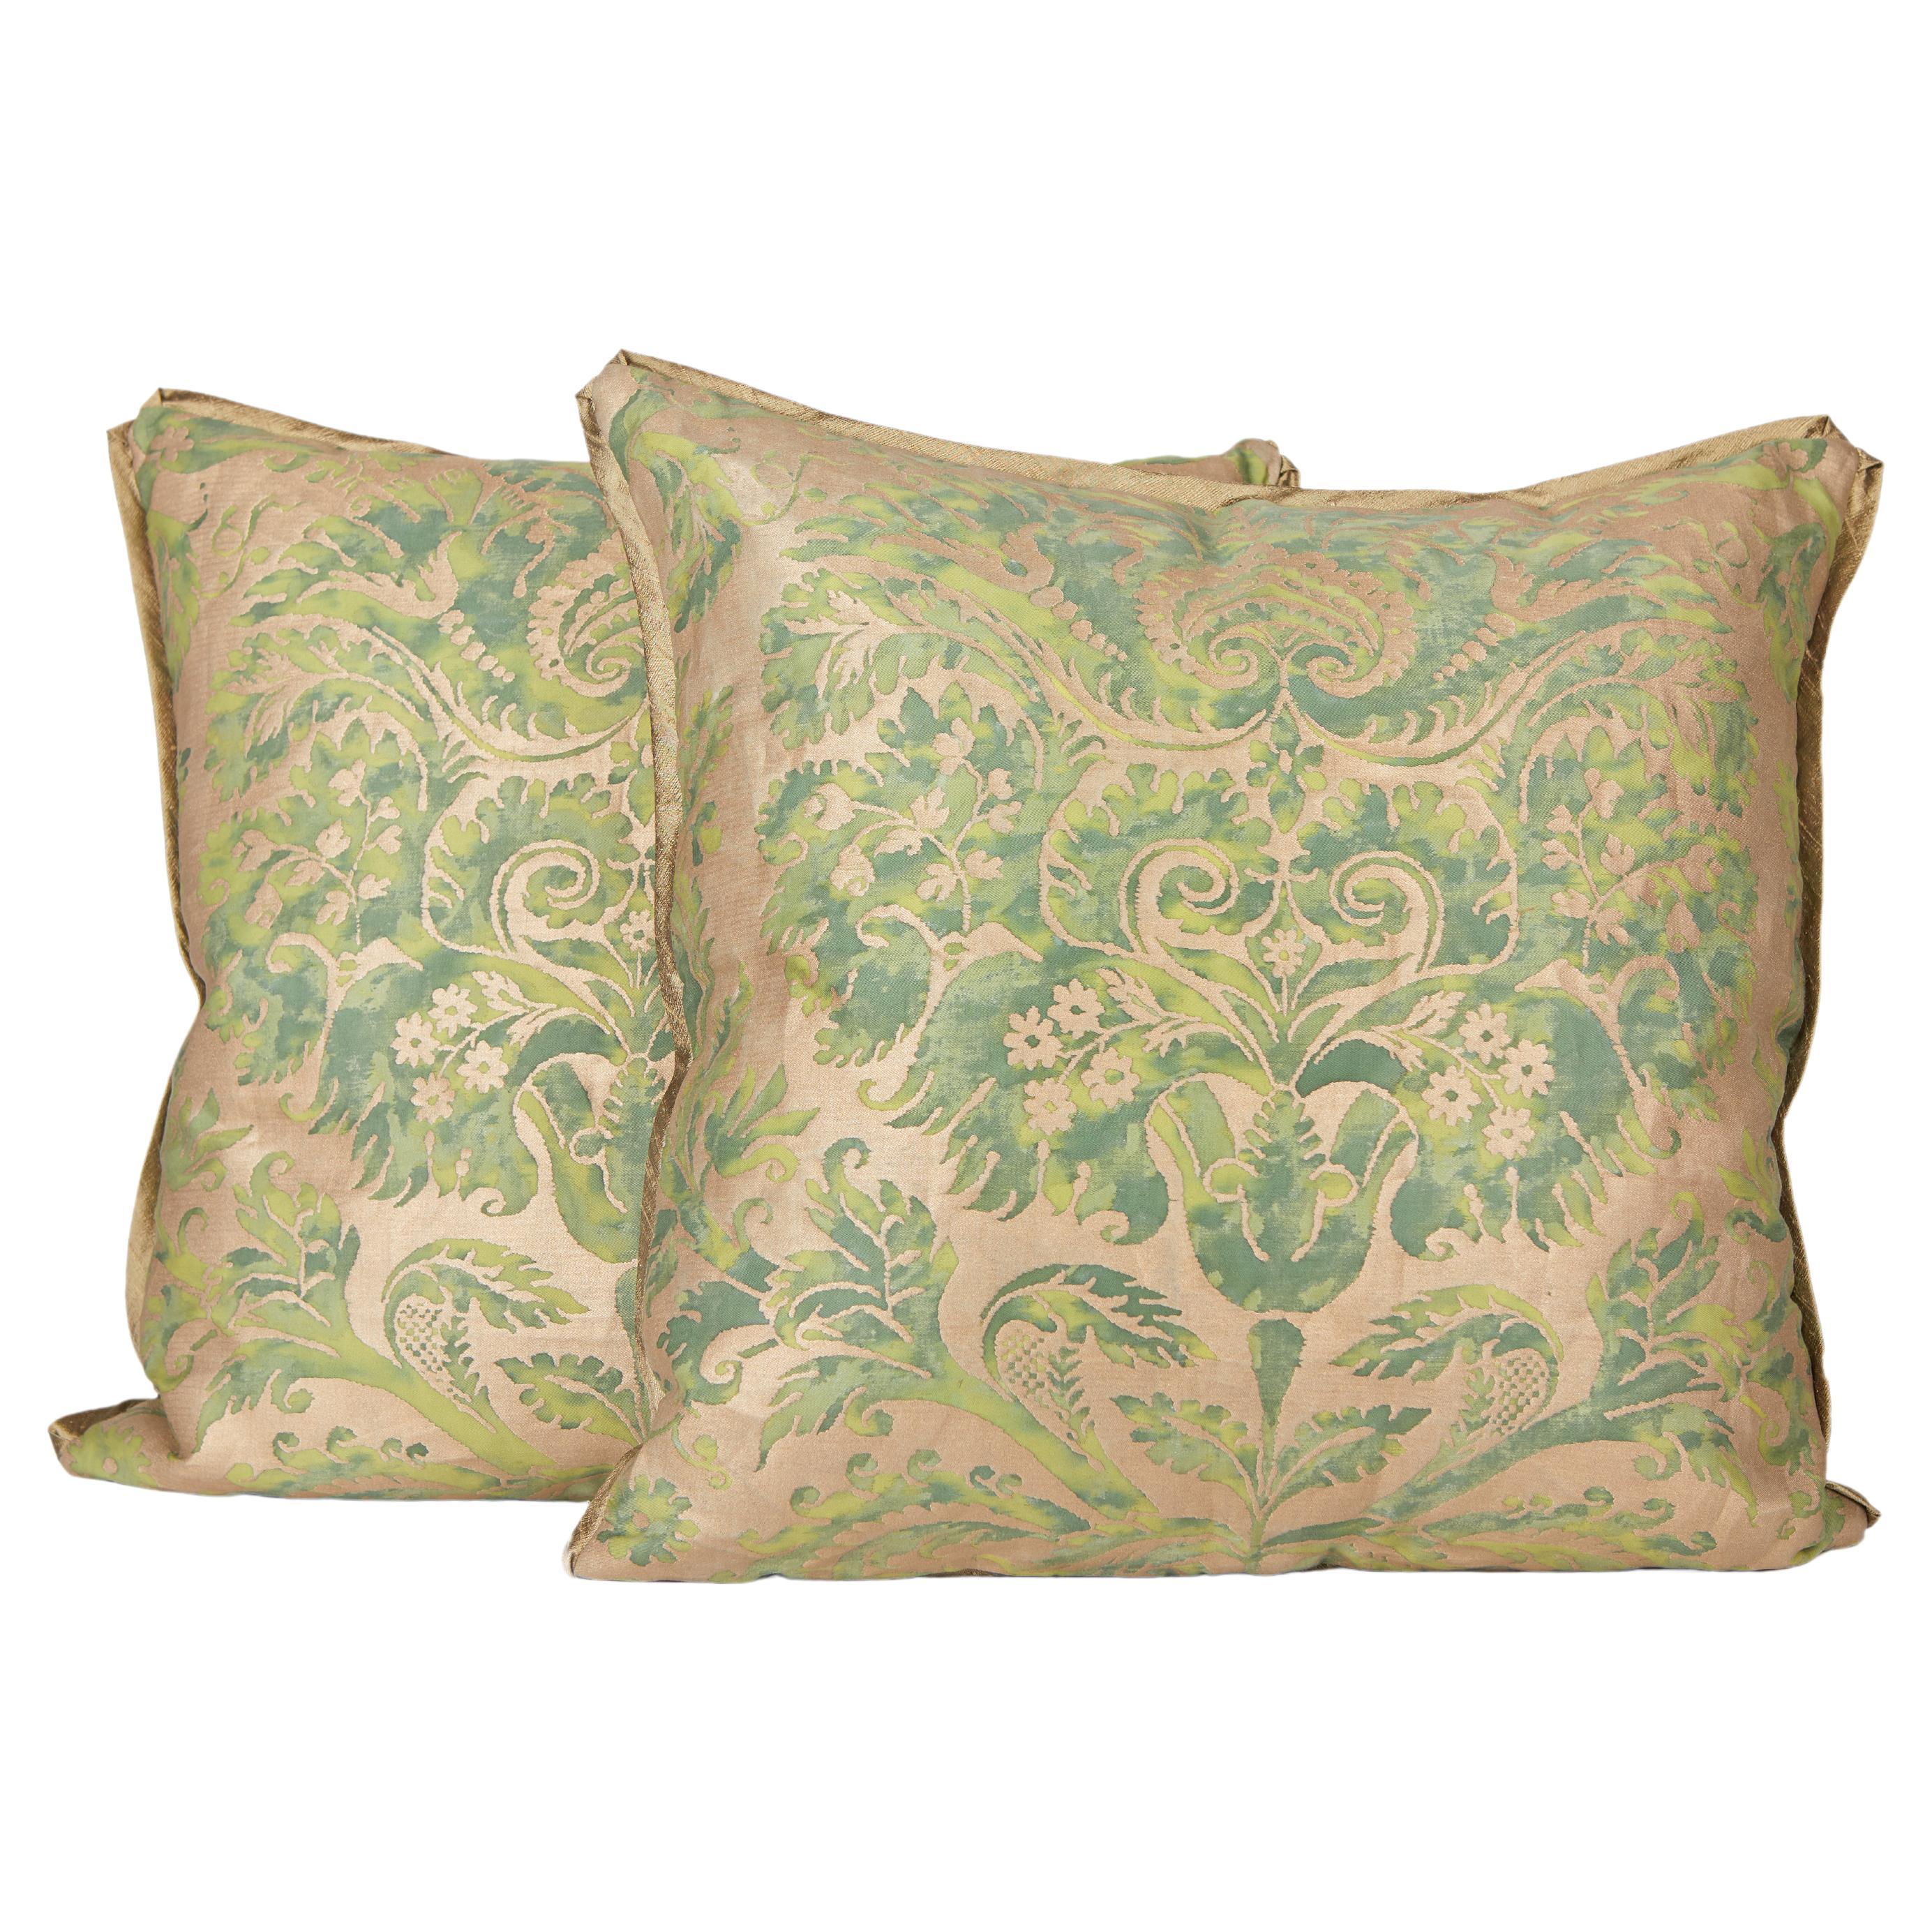 Pair of Fortuny Fabric Cushions in the Demedici Pattern, Green and Silvery Gold